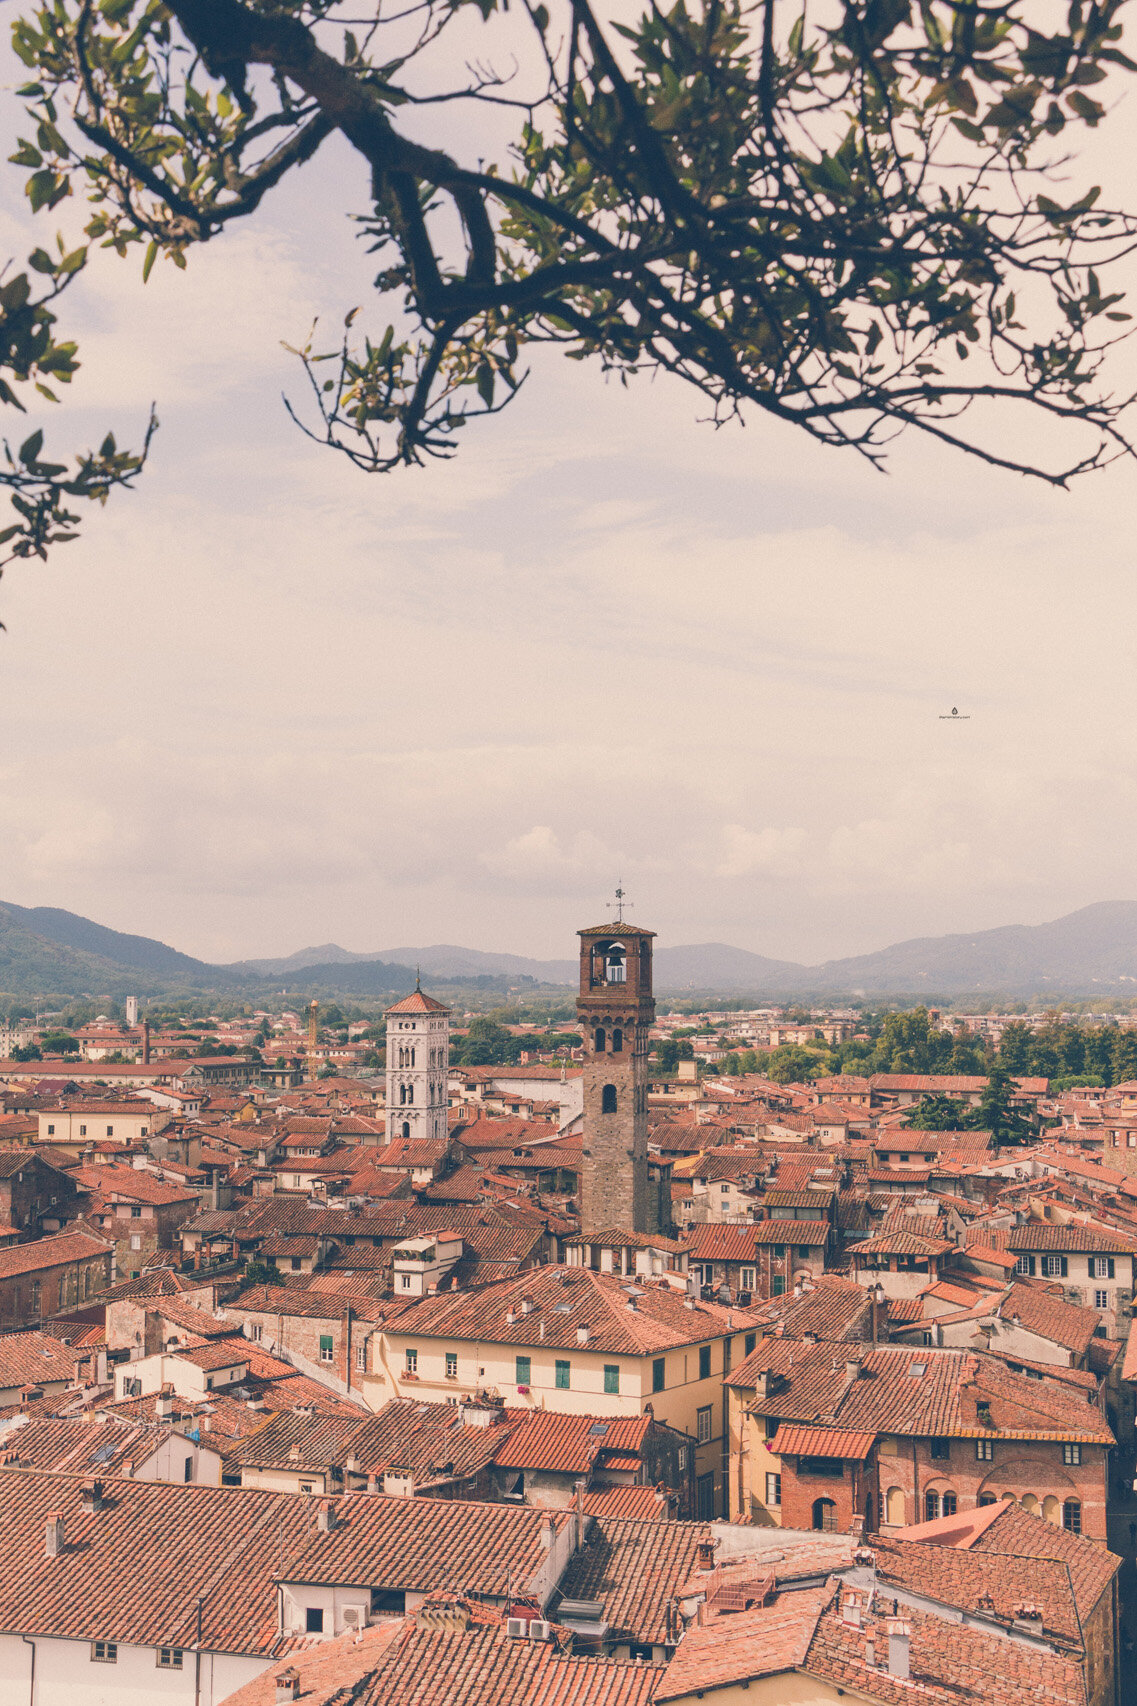 The view of Lucca from Guinigi tower